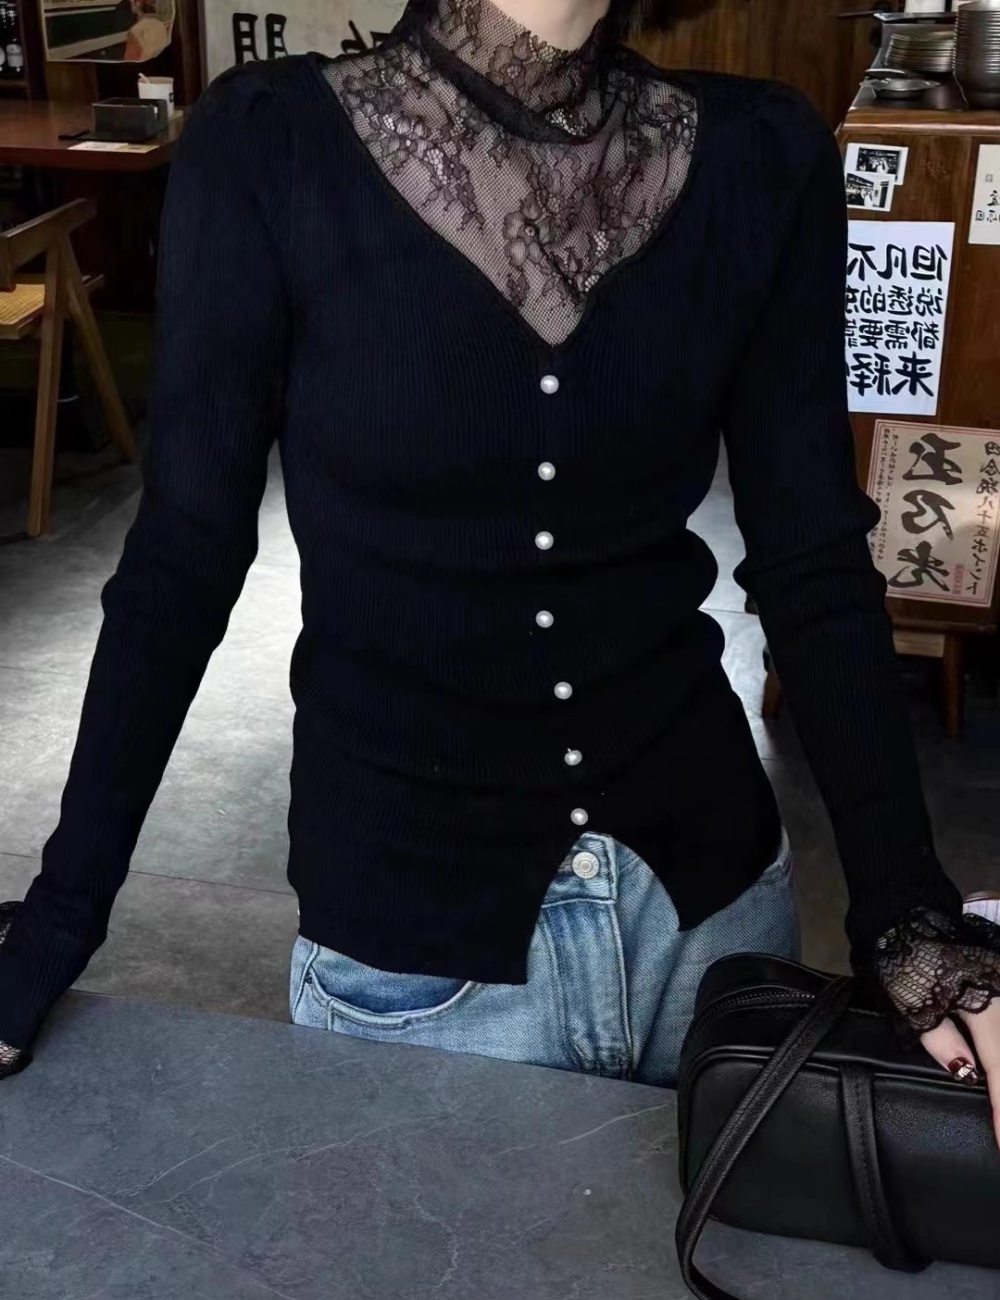 Lace France style bottoming shirt splice niche sweater